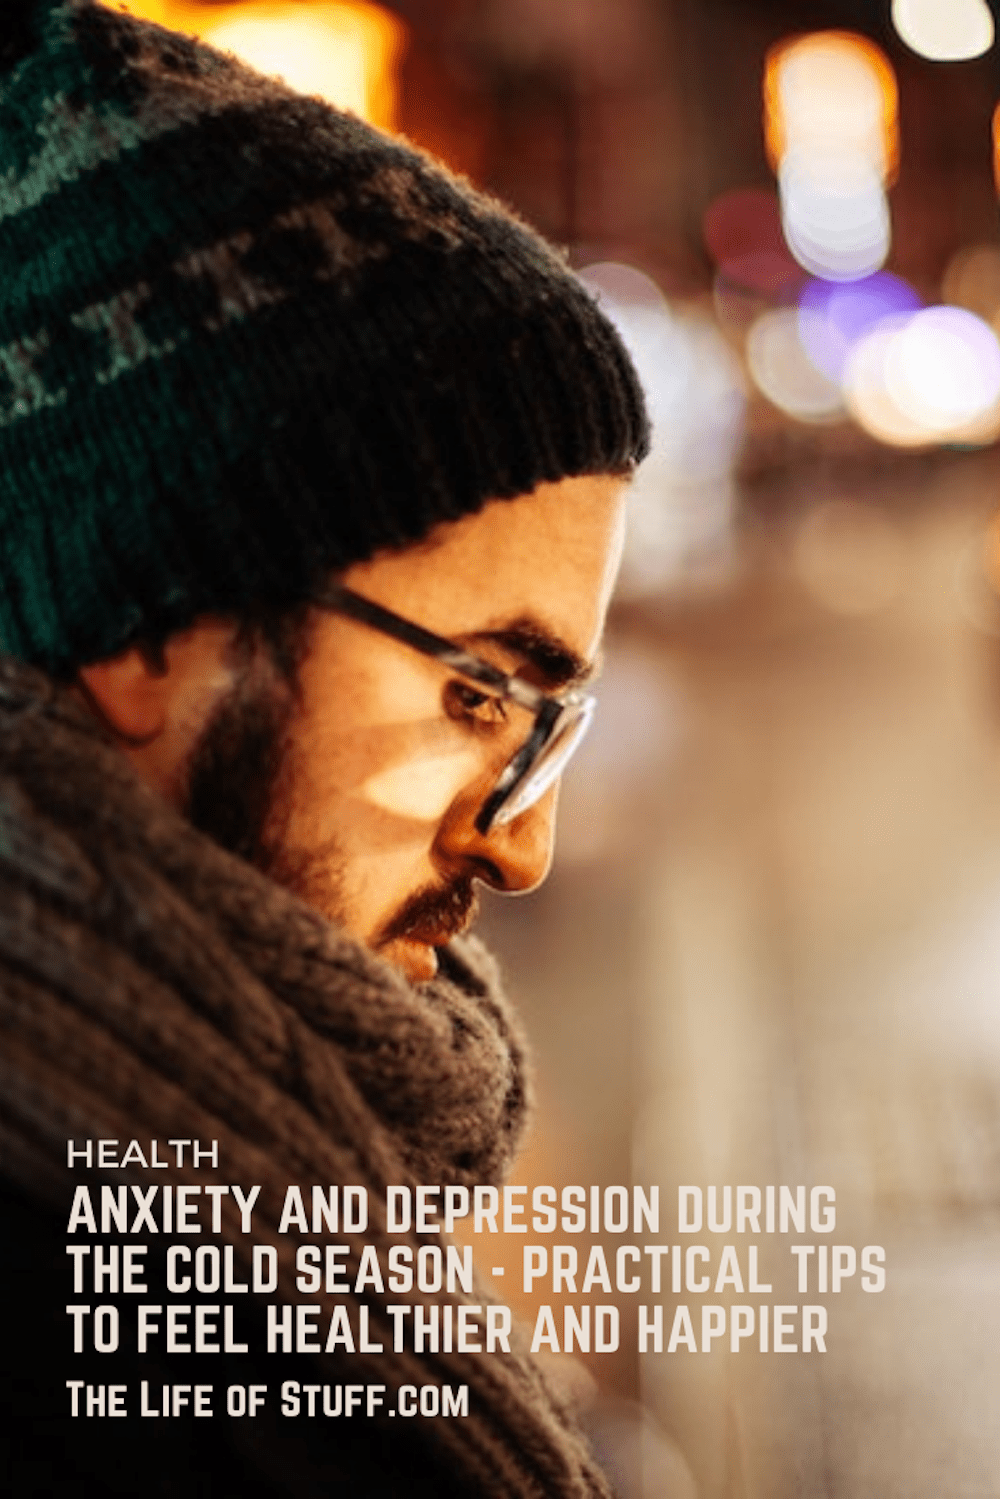 Anxiety and Depression During the Cold Season - The Life of Stuff